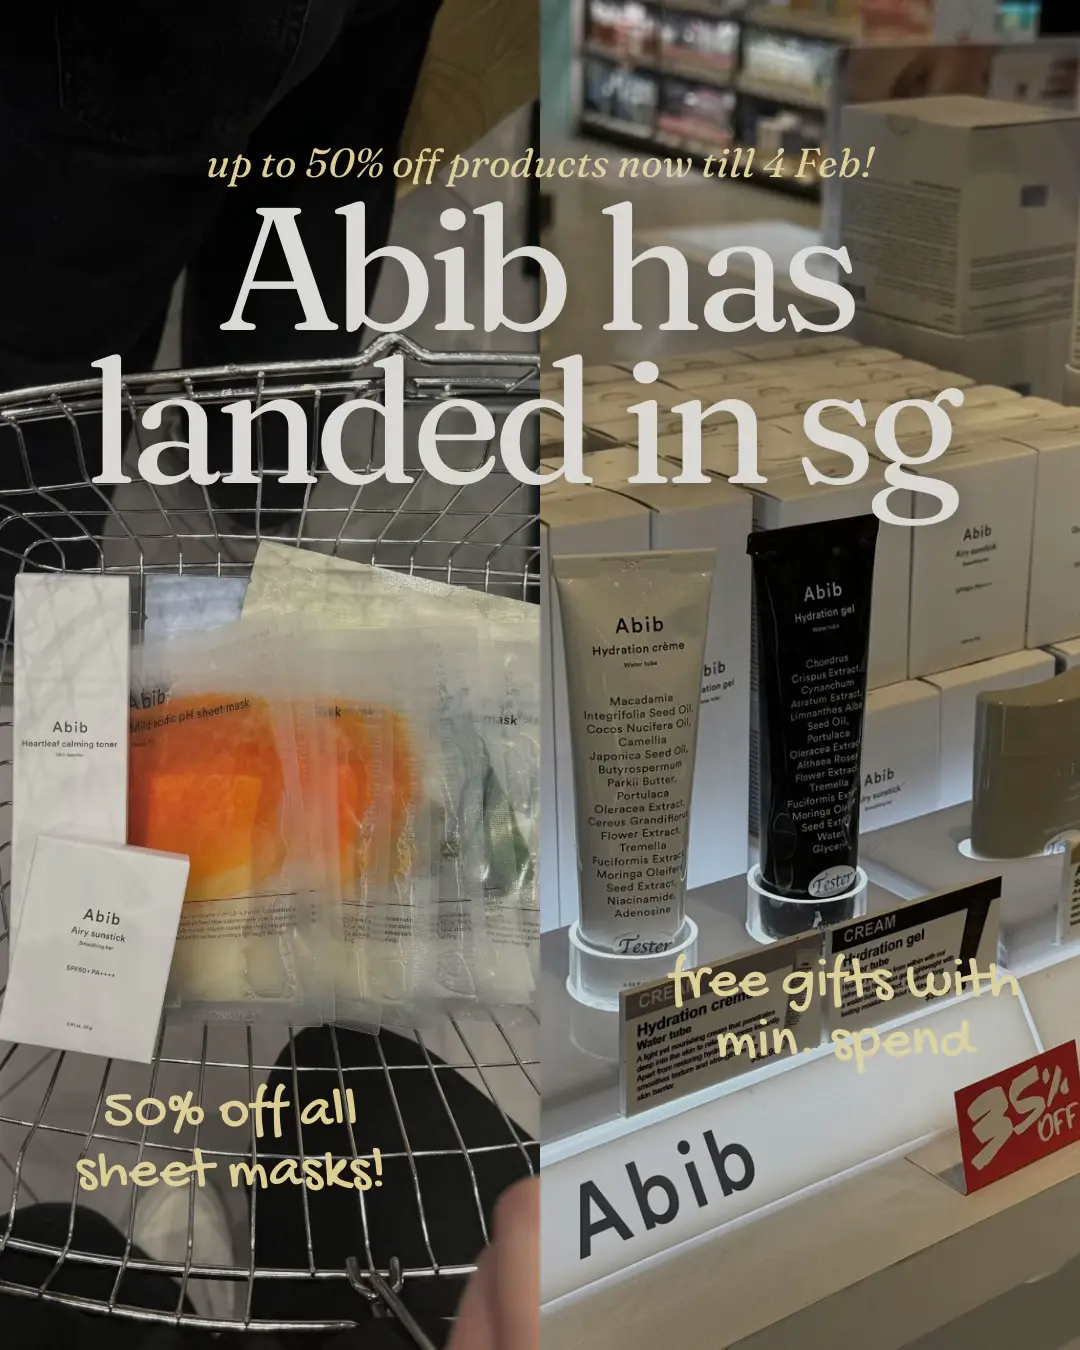 Abib is finally here with crazy deals and %! 😍's images